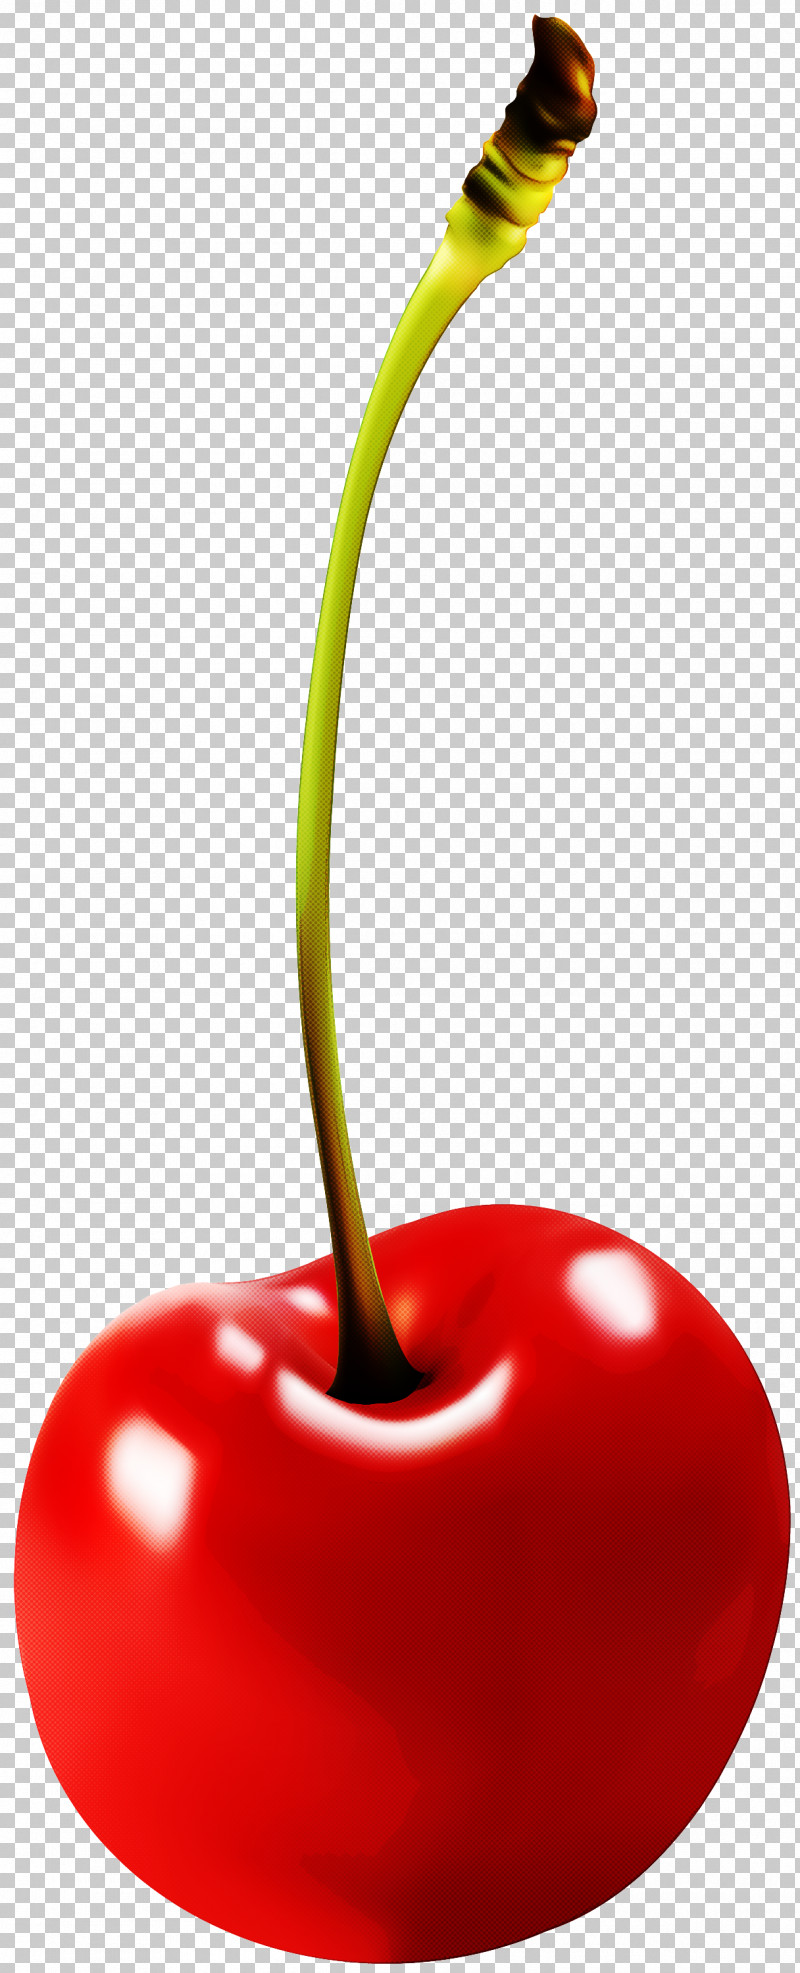 Cherry Red Fruit Plant Food PNG, Clipart, Candy Apple, Cherry, Drupe, Food, Fruit Free PNG Download